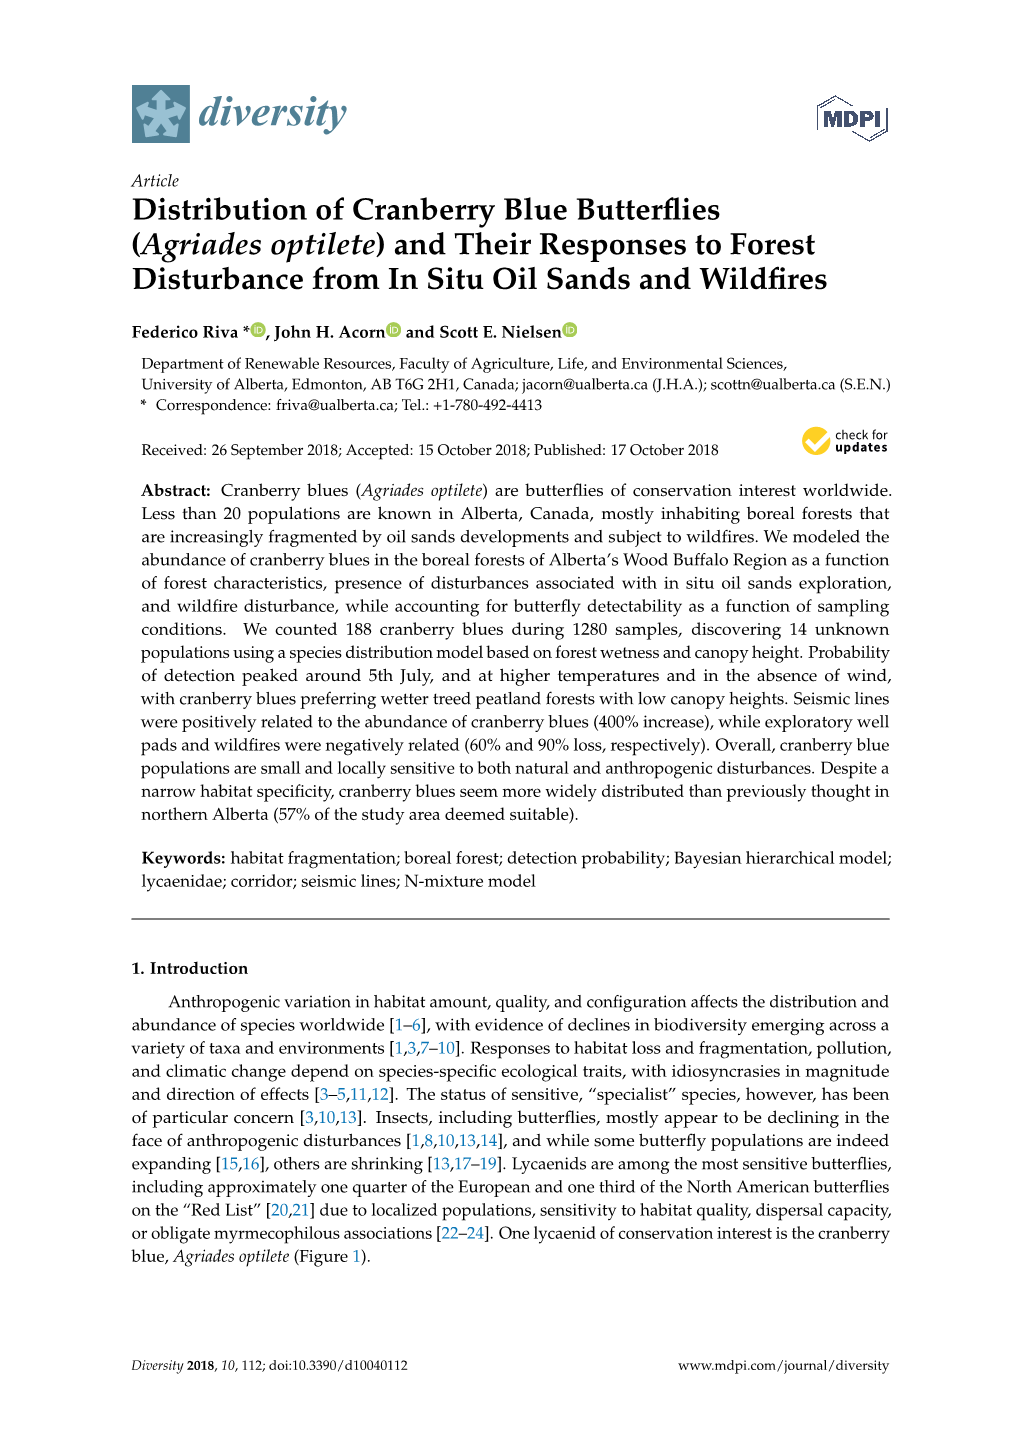 (Agriades Optilete) and Their Responses to Forest Disturbance from in Situ Oil Sands and Wildfires